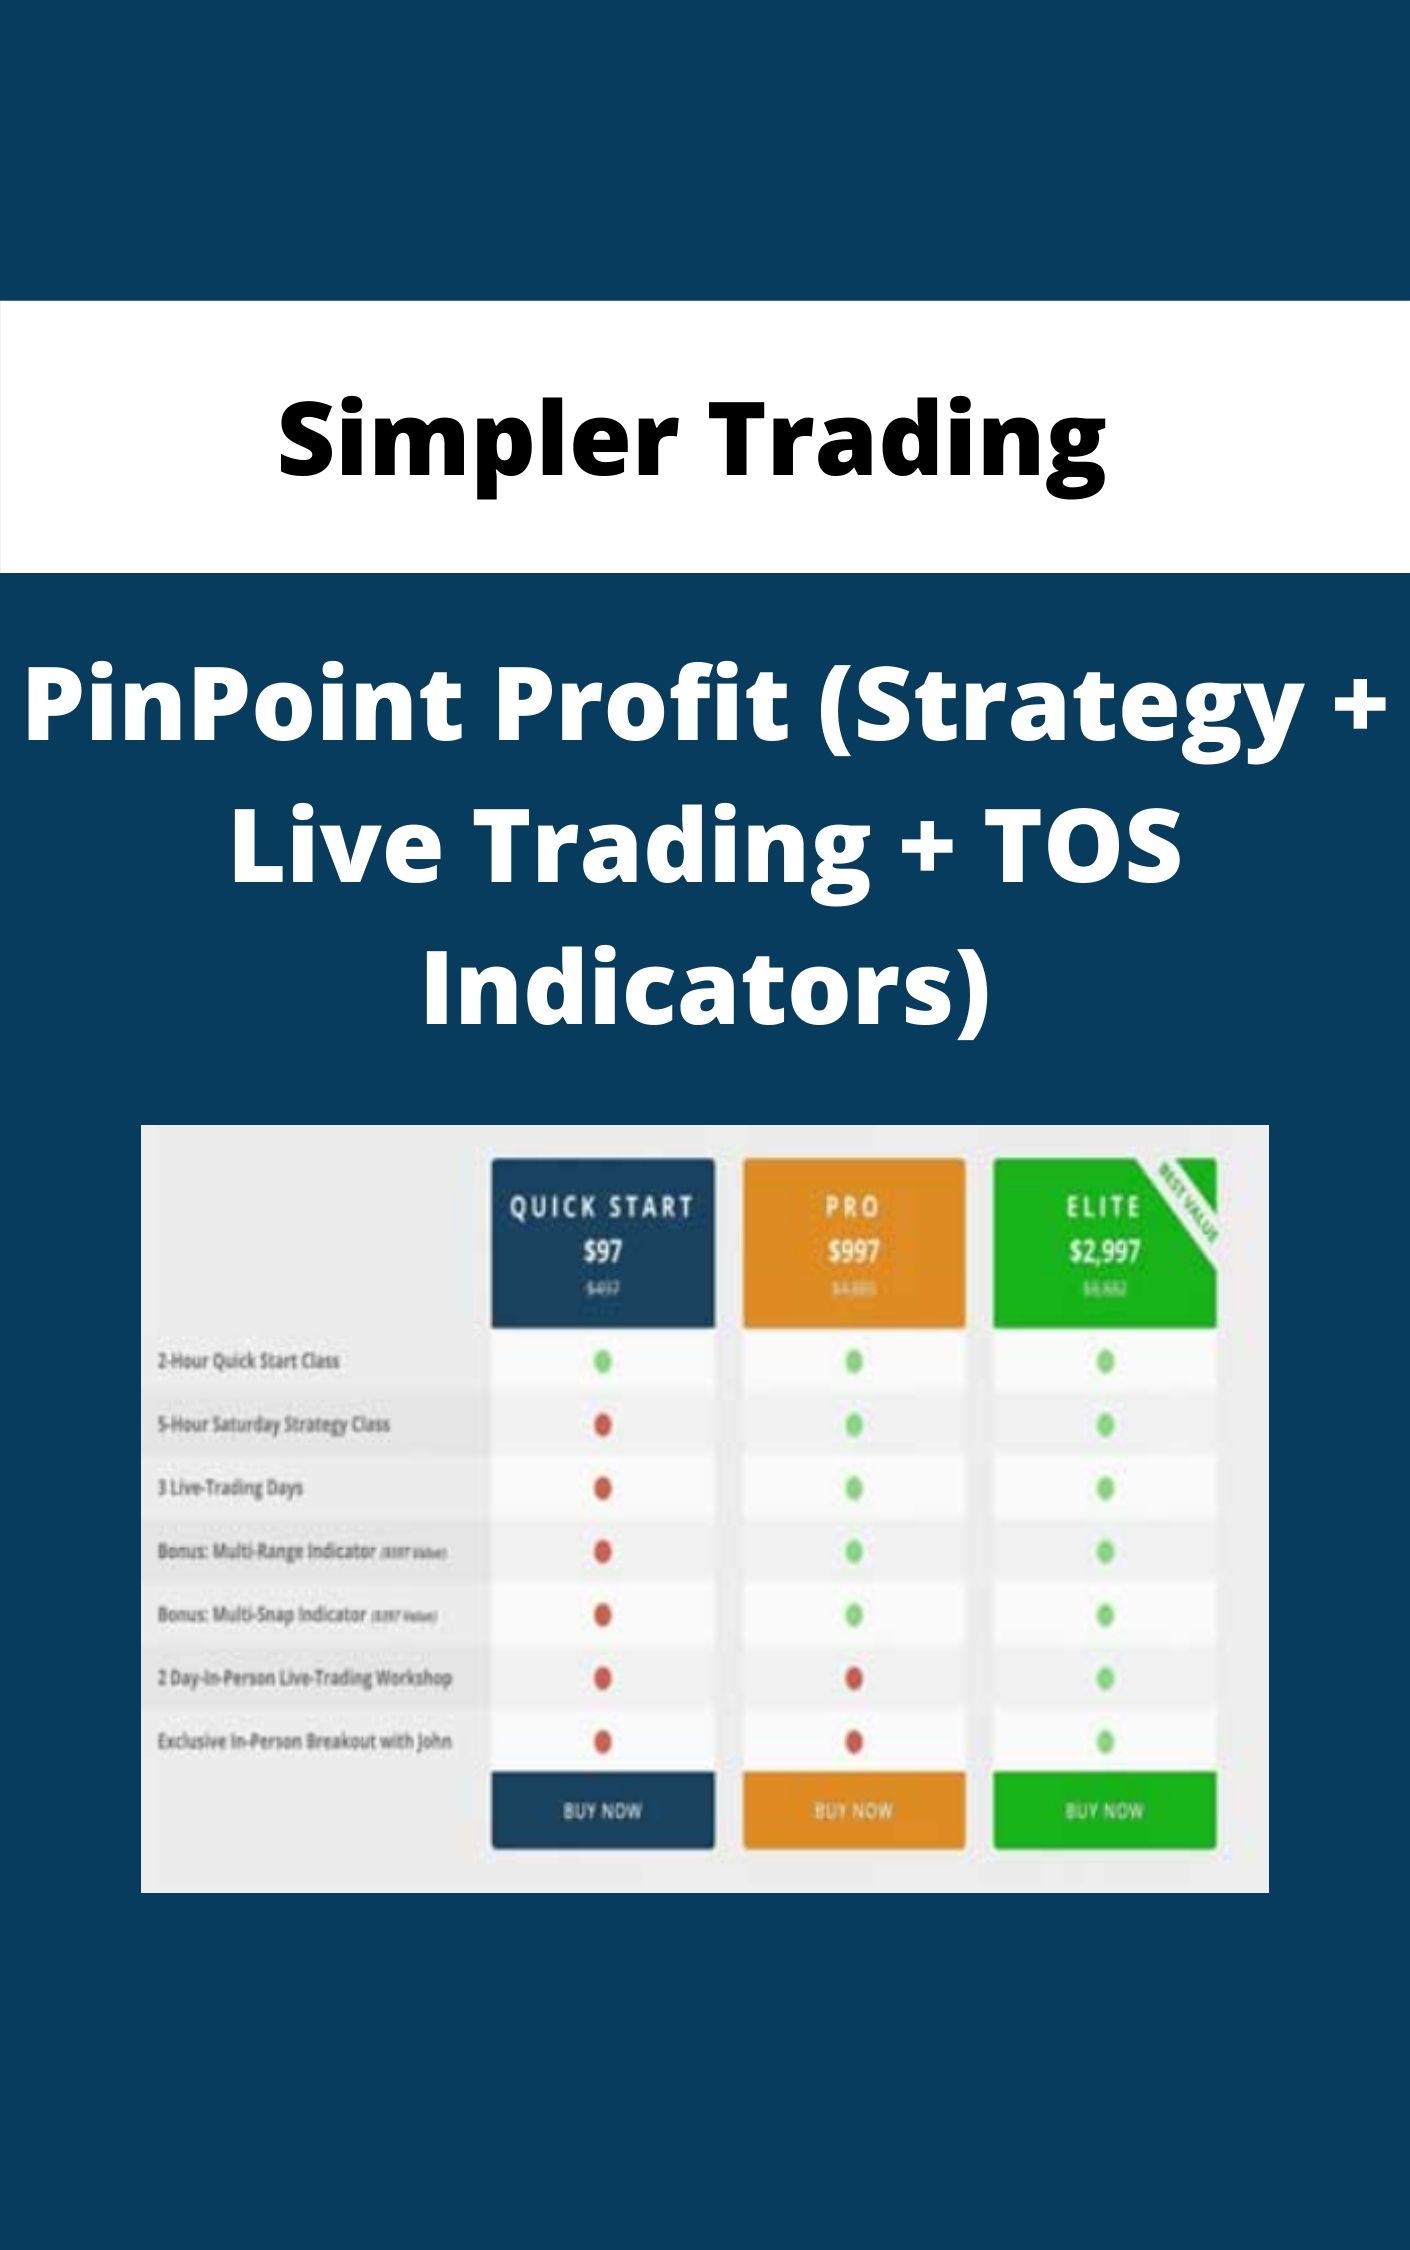 Simpler Trading – PinPoint Profit (Strategy + Live Trading + TOS Indicators)